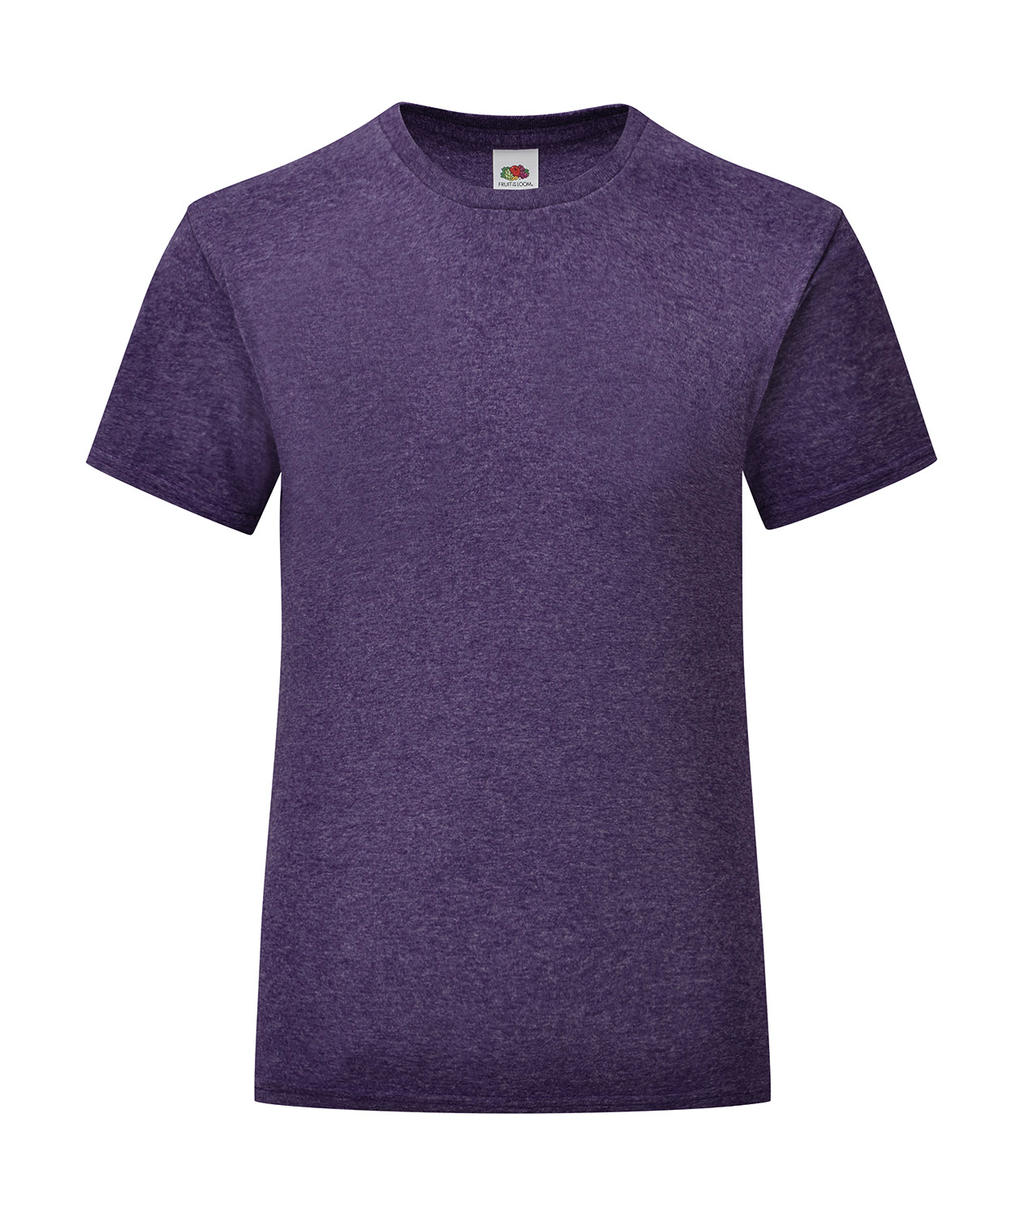  Girls Iconic 150 T in Farbe Heather Purple